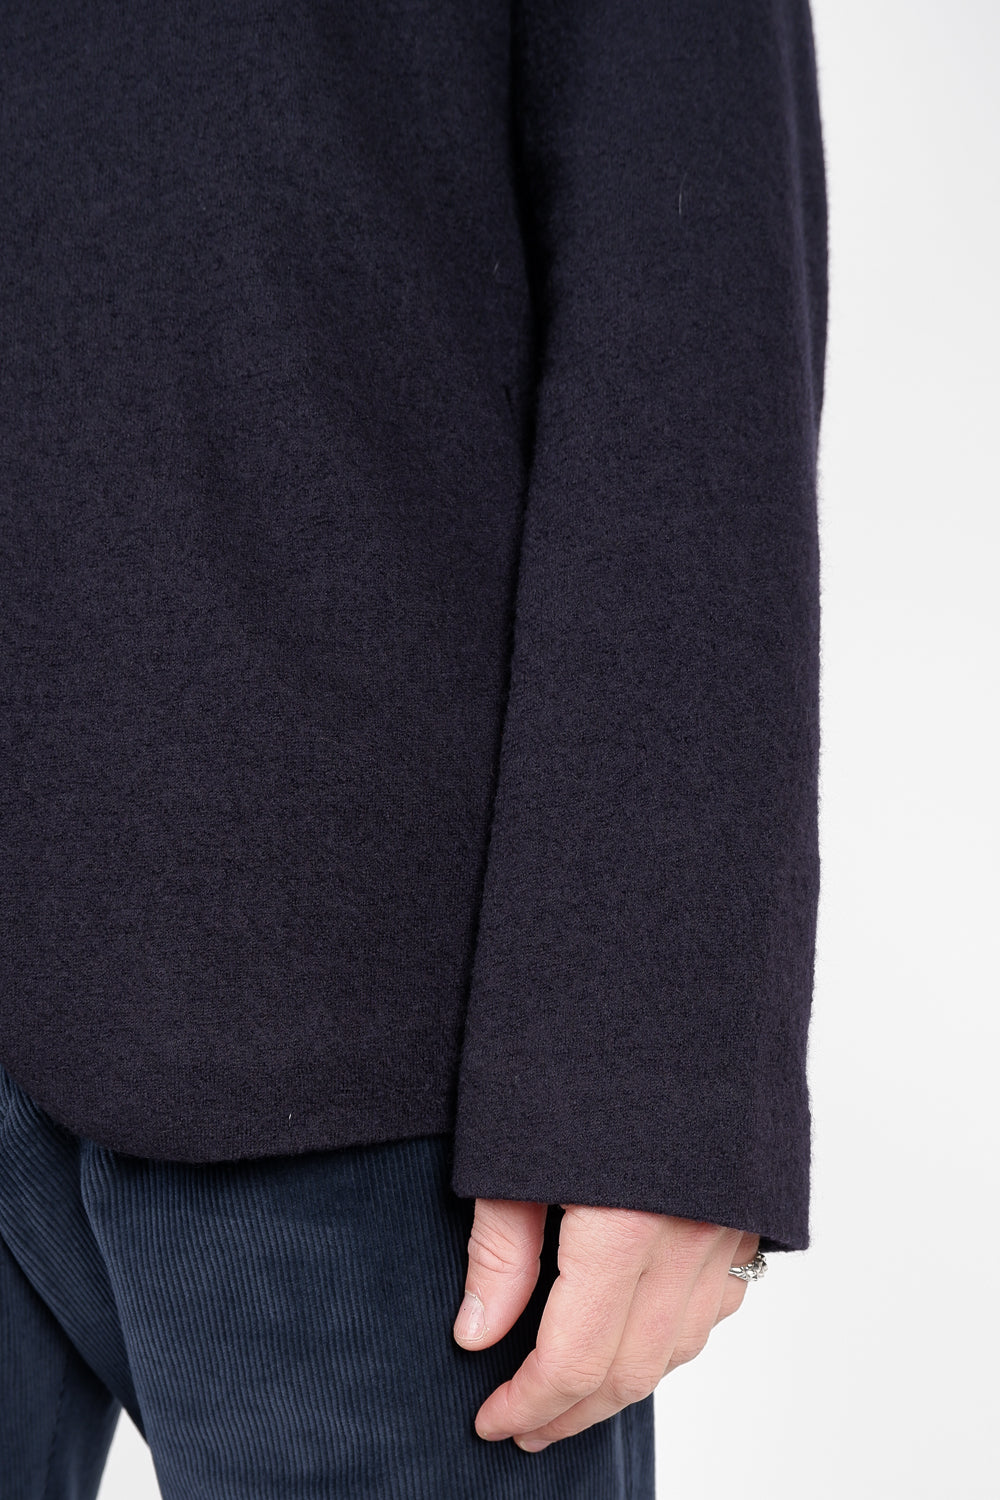 Buy the Hannes Roether Boiled Wool Blazer in Navy at Intro. Spend £50 for free UK delivery. Official stockists. We ship worldwide.